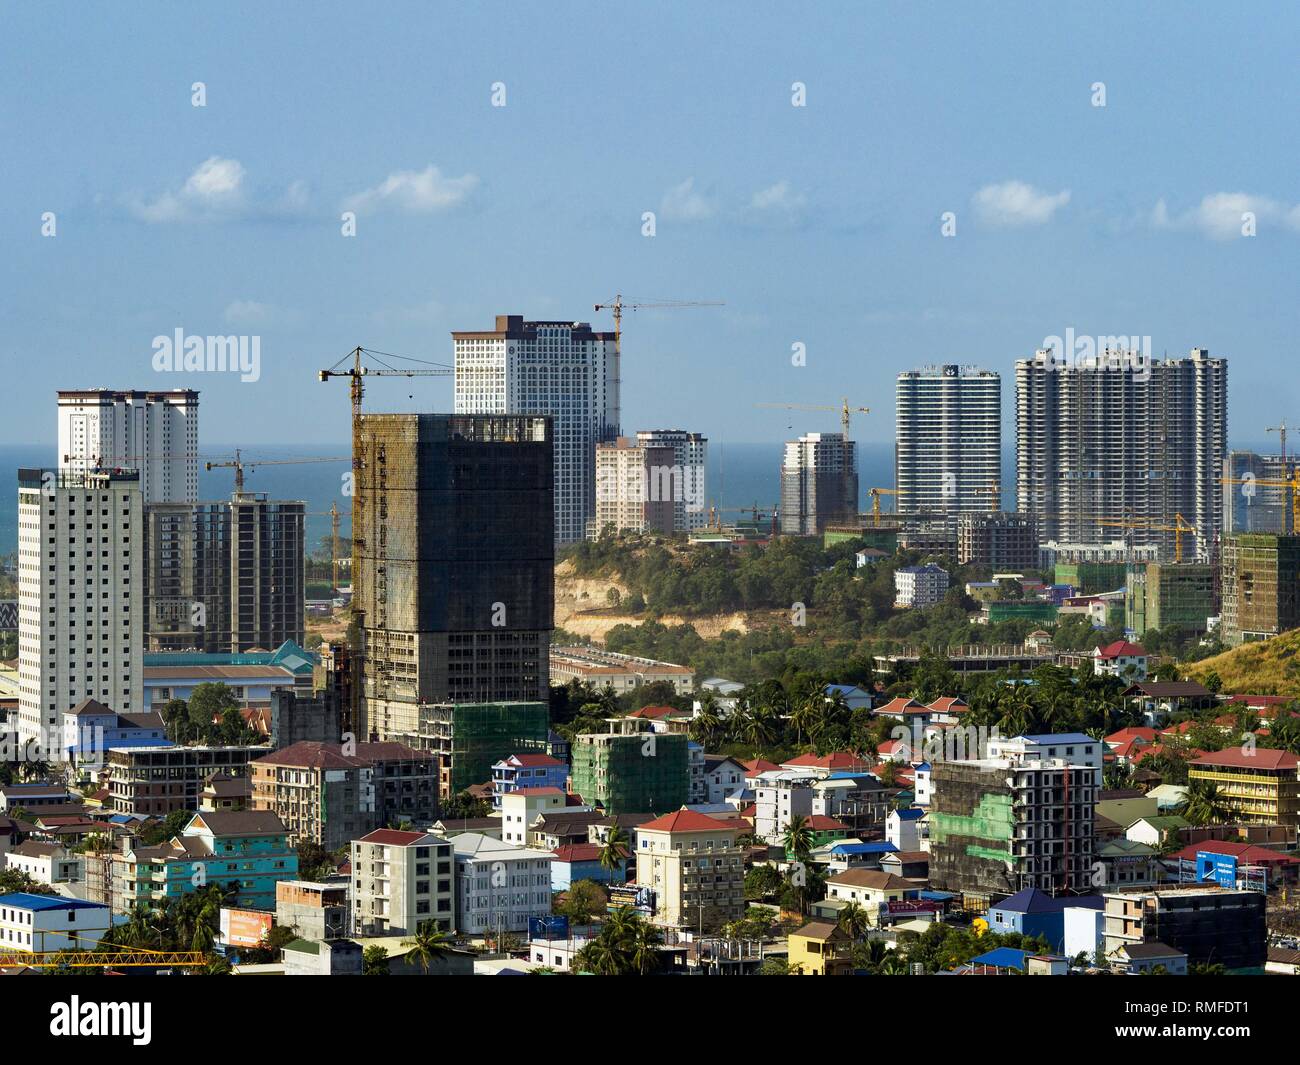 Sihanoukville, Preah Sihanouk, Cambodia. 15th Feb, 2019. Construction sites for Chinese resorts and casinos rise over downtown Sihanoukville. There are about 80 Chinese casinos and resort hotels open in Sihanoukville and dozens more under construction. The casinos are changing the city, once a sleepy port on Southeast Asia's ''backpacker trail'' into a booming city. The change is coming with a cost though. Many Cambodian residents of Sihanoukville have lost their homes to make way for the casinos and the jobs are going to Chinese workers, brought in to build casinos and work in the casin Stock Photo